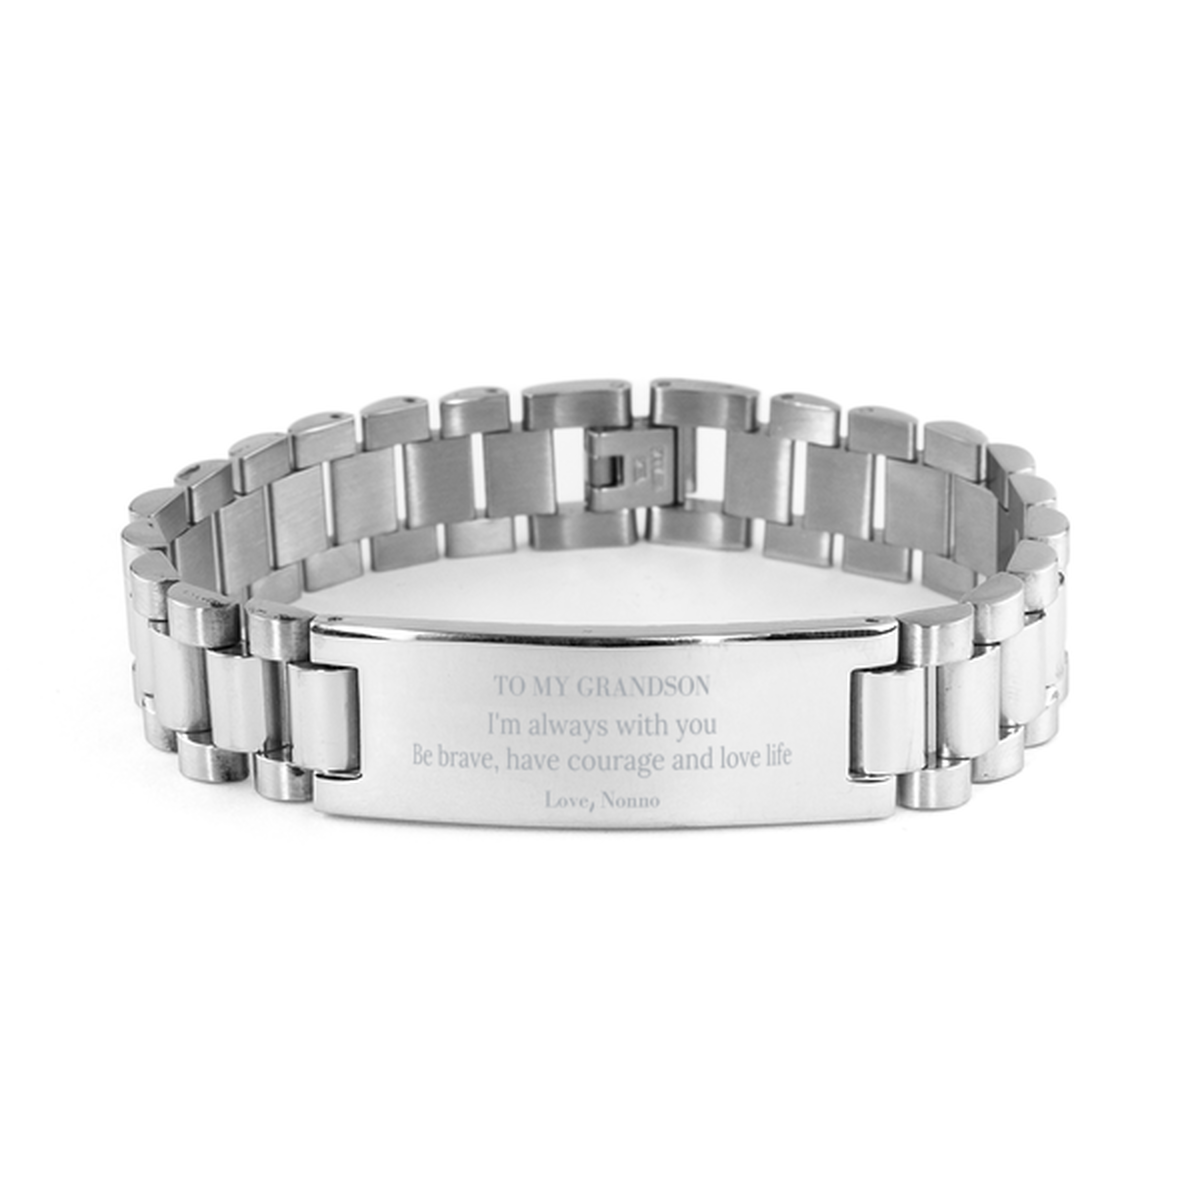 To My Grandson Gifts from Nonno, Unique Ladder Stainless Steel Bracelet Inspirational Christmas Birthday Graduation Gifts for Grandson I'm always with you. Be brave, have courage and love life. Love, Nonno